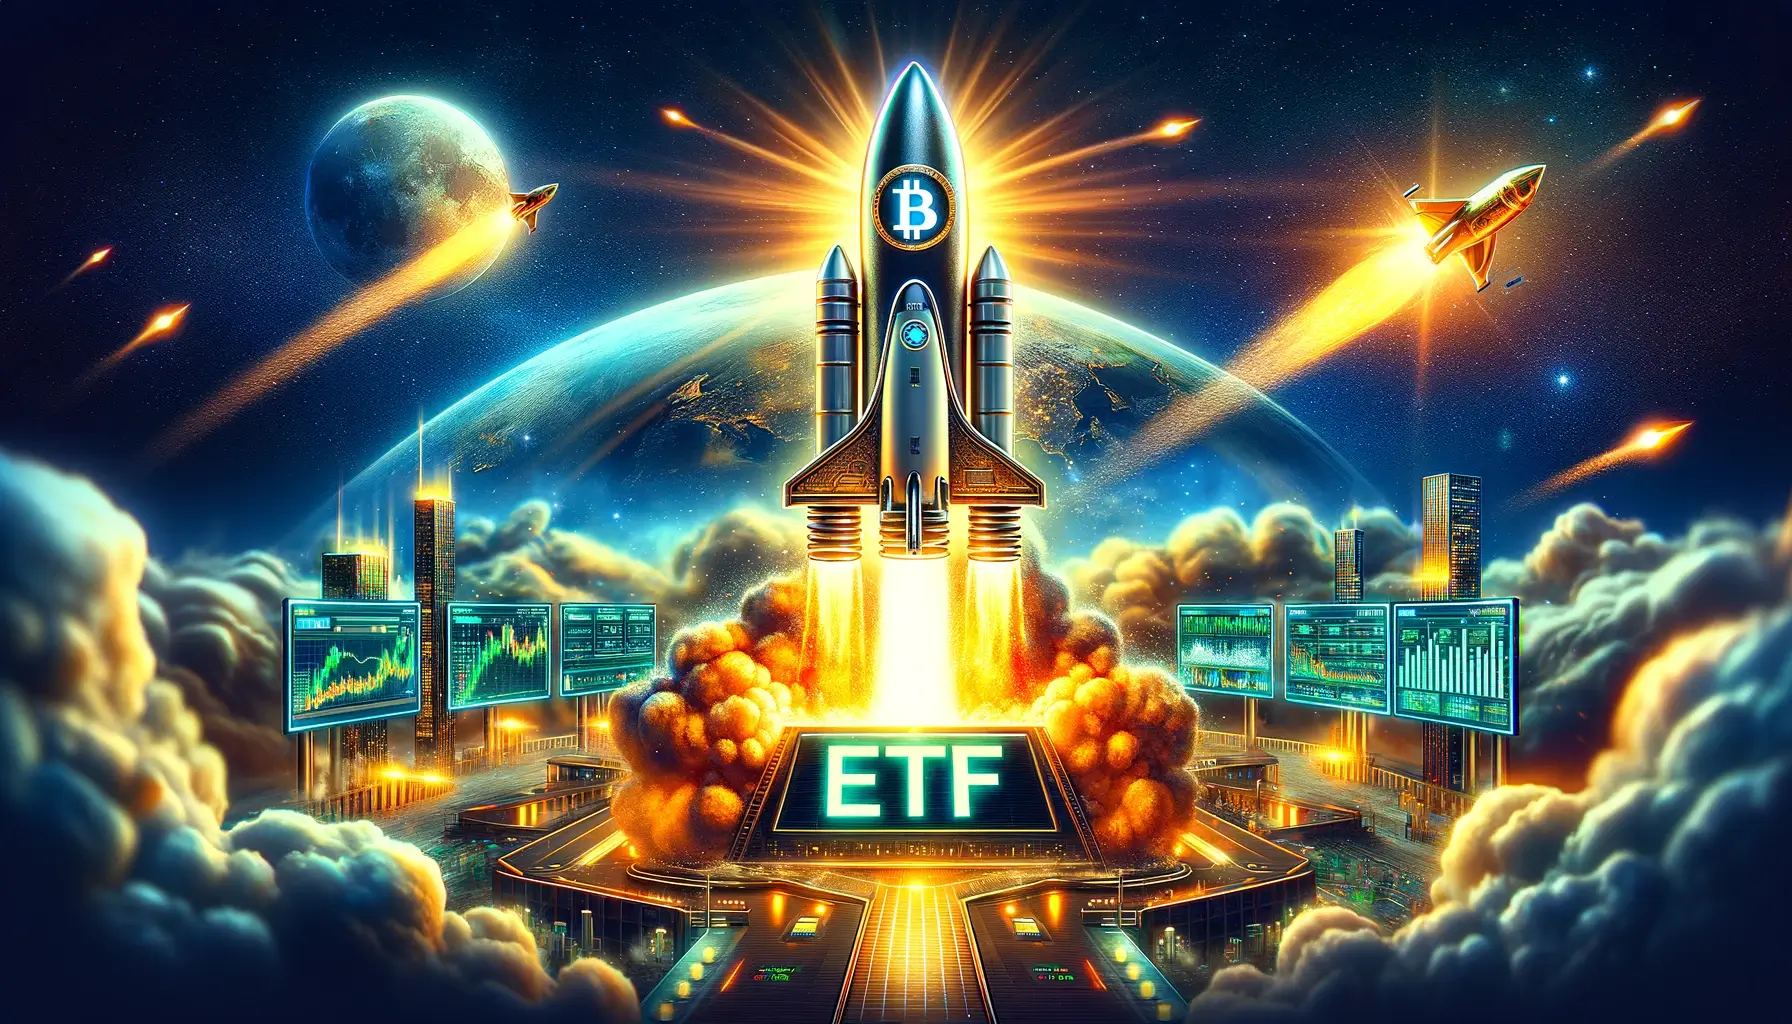 Bitcoin rocket blasting off from an "ETF" base